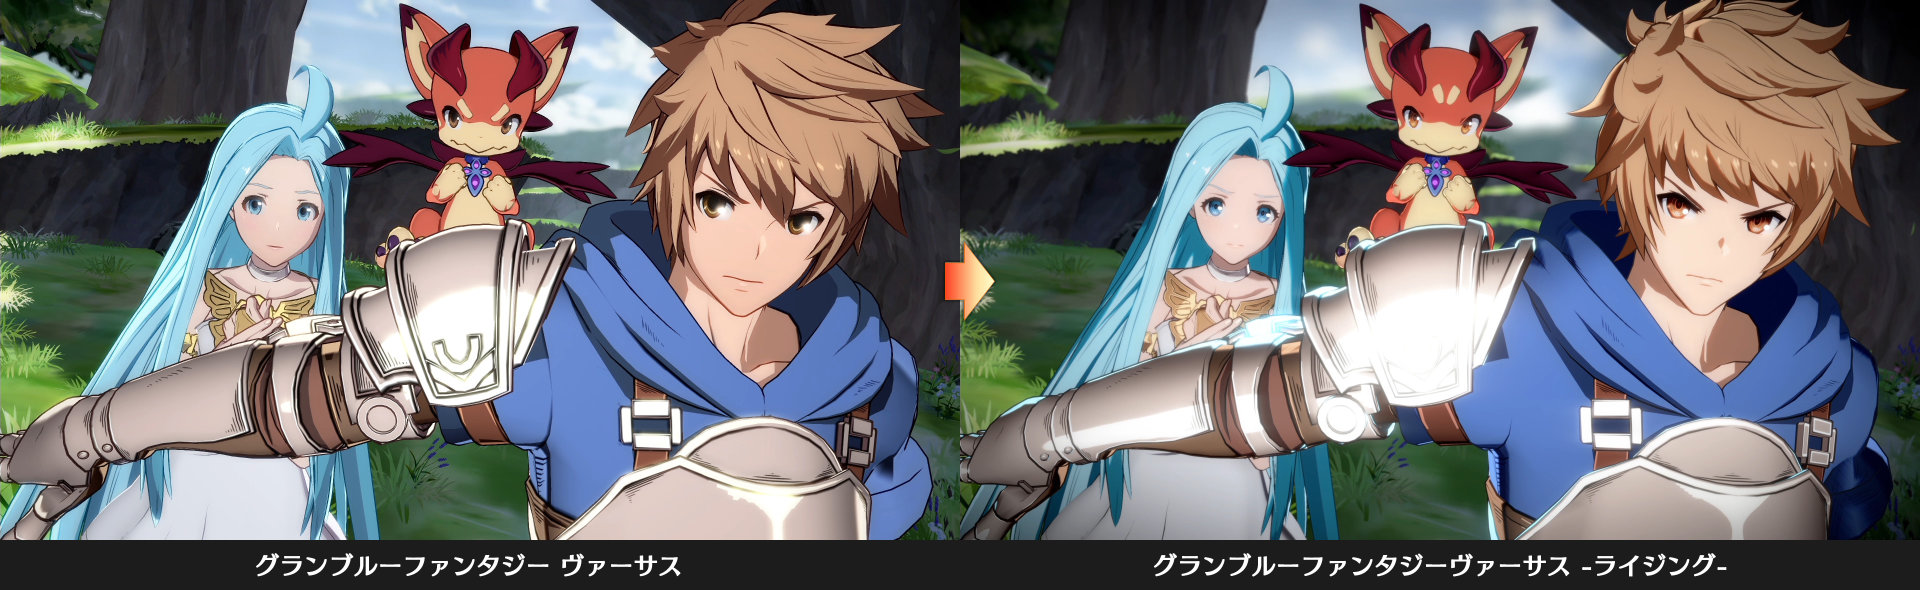 Granblue Fantasy Versus: Rising updates the base game with more